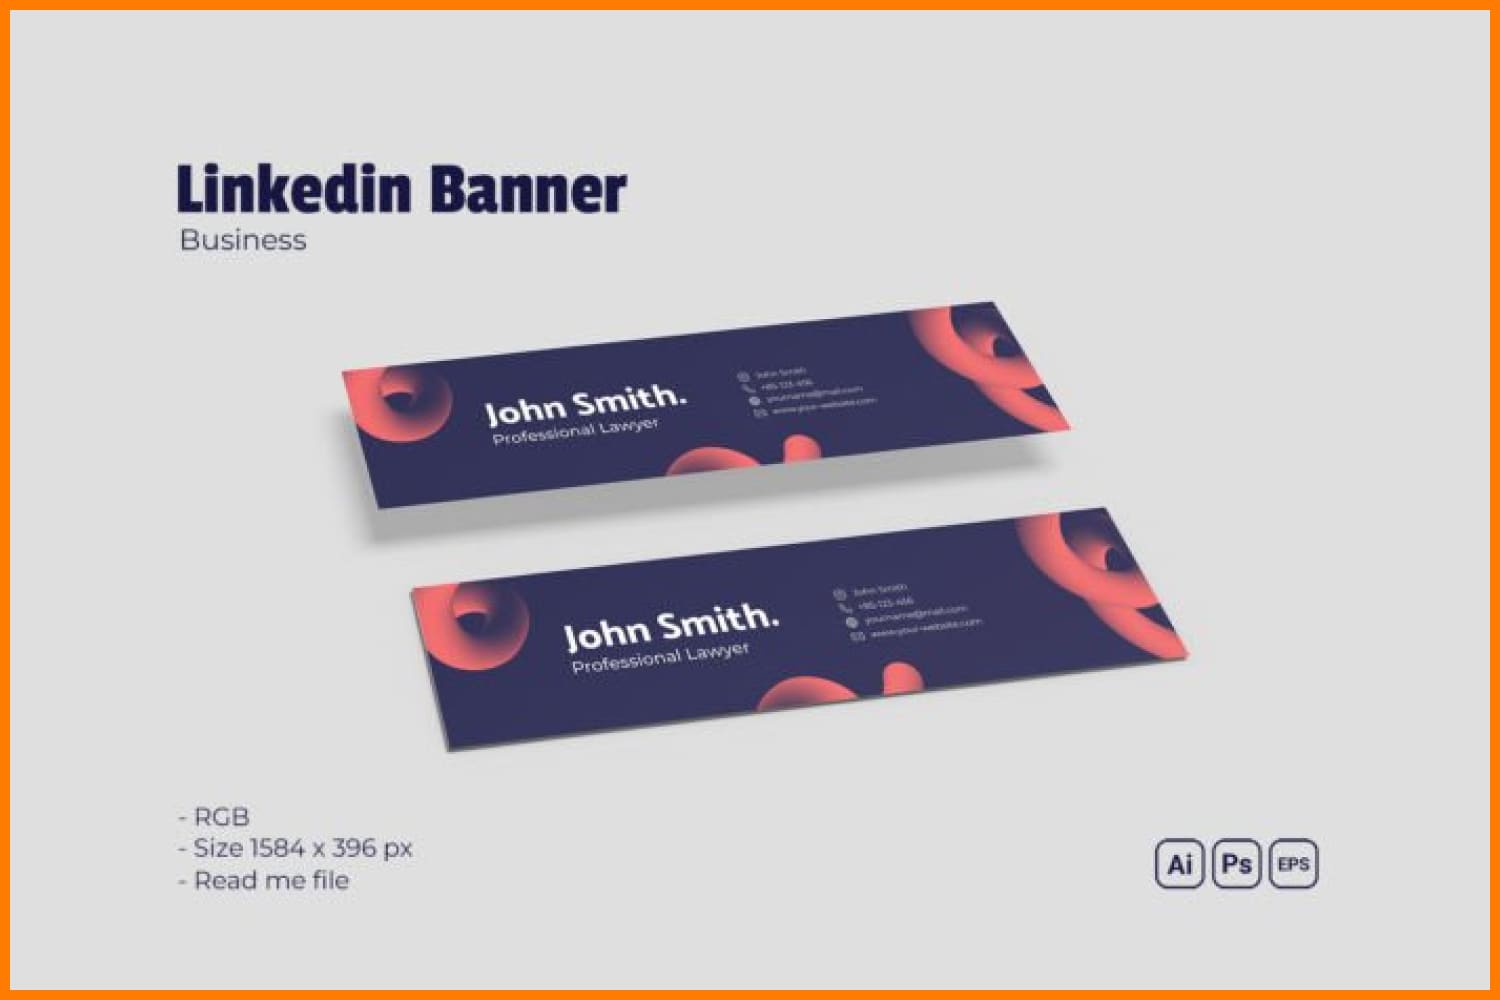 Collage of banners for linkedin user with blue background and red geometric shapes.